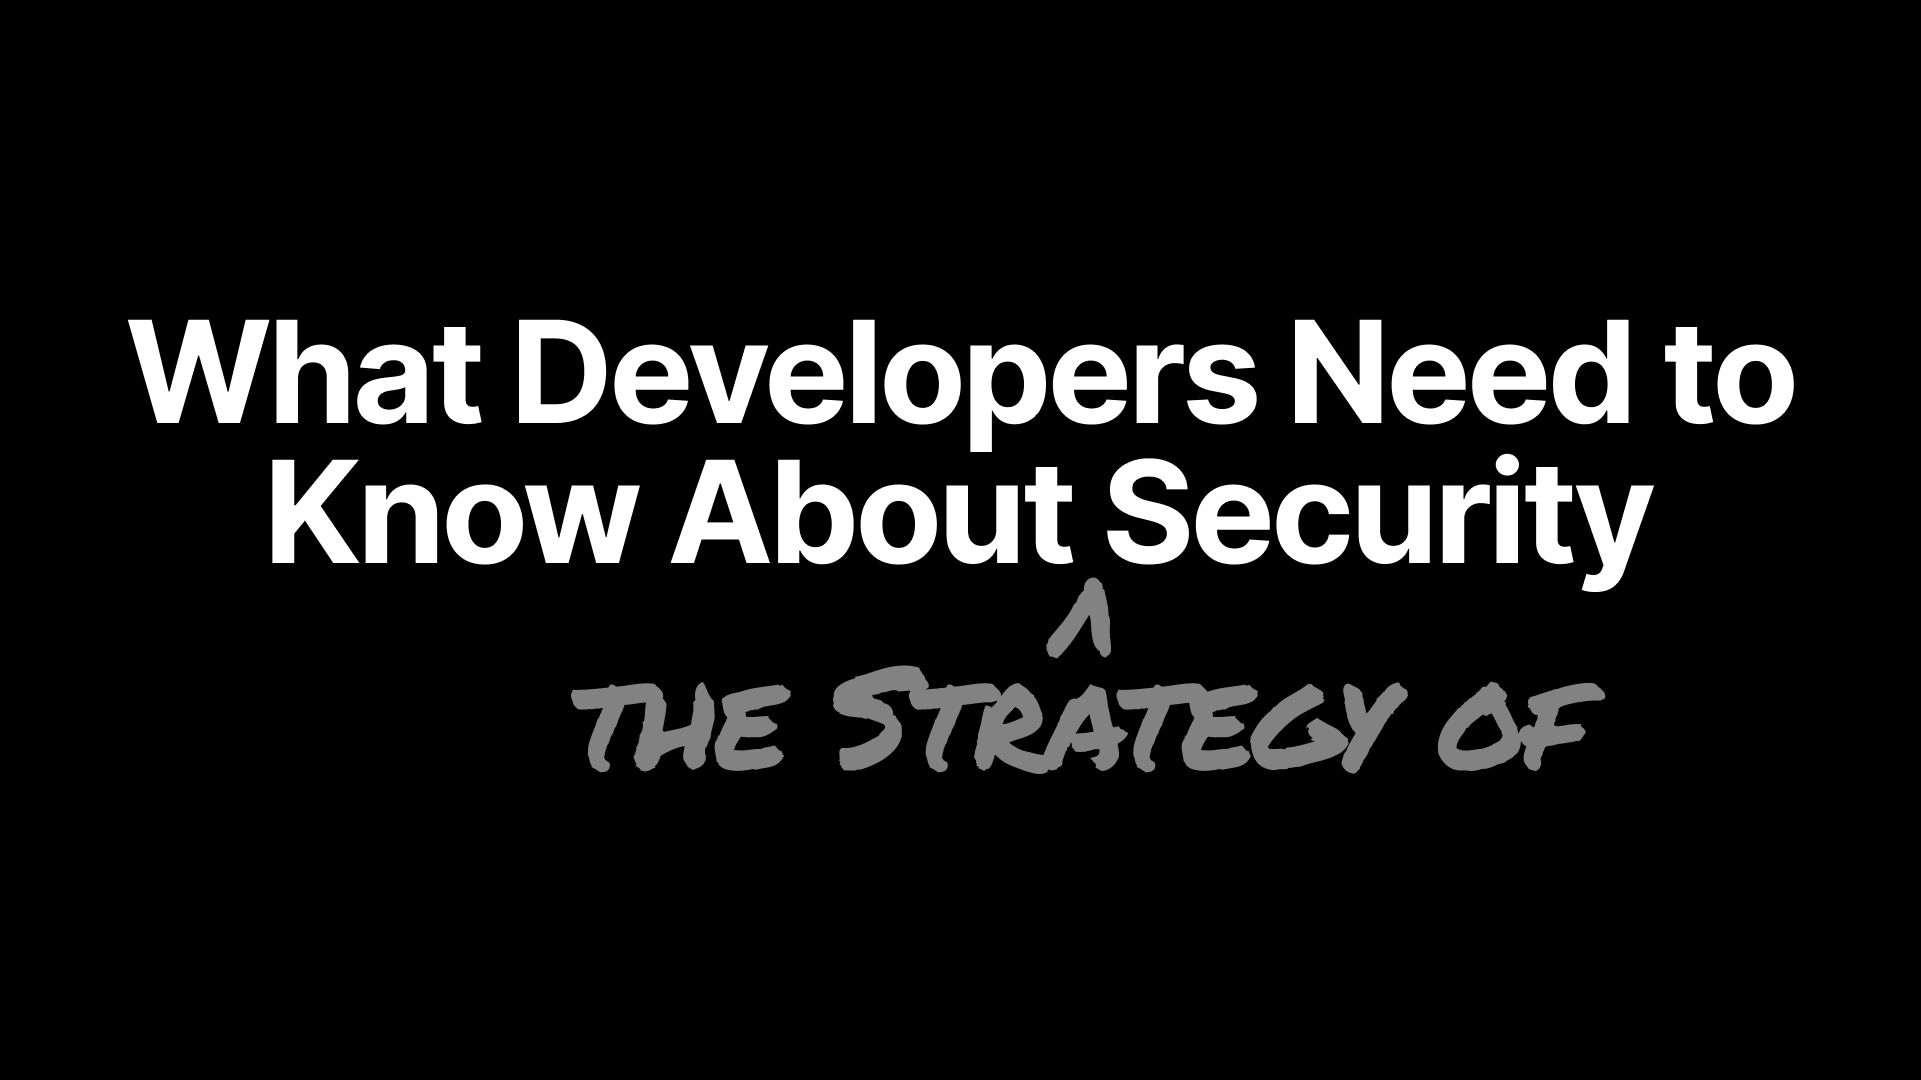 Application security is changing in dramatic ways. Change is accelerating so quickly that the current state is almost unrecognizable to someone who st